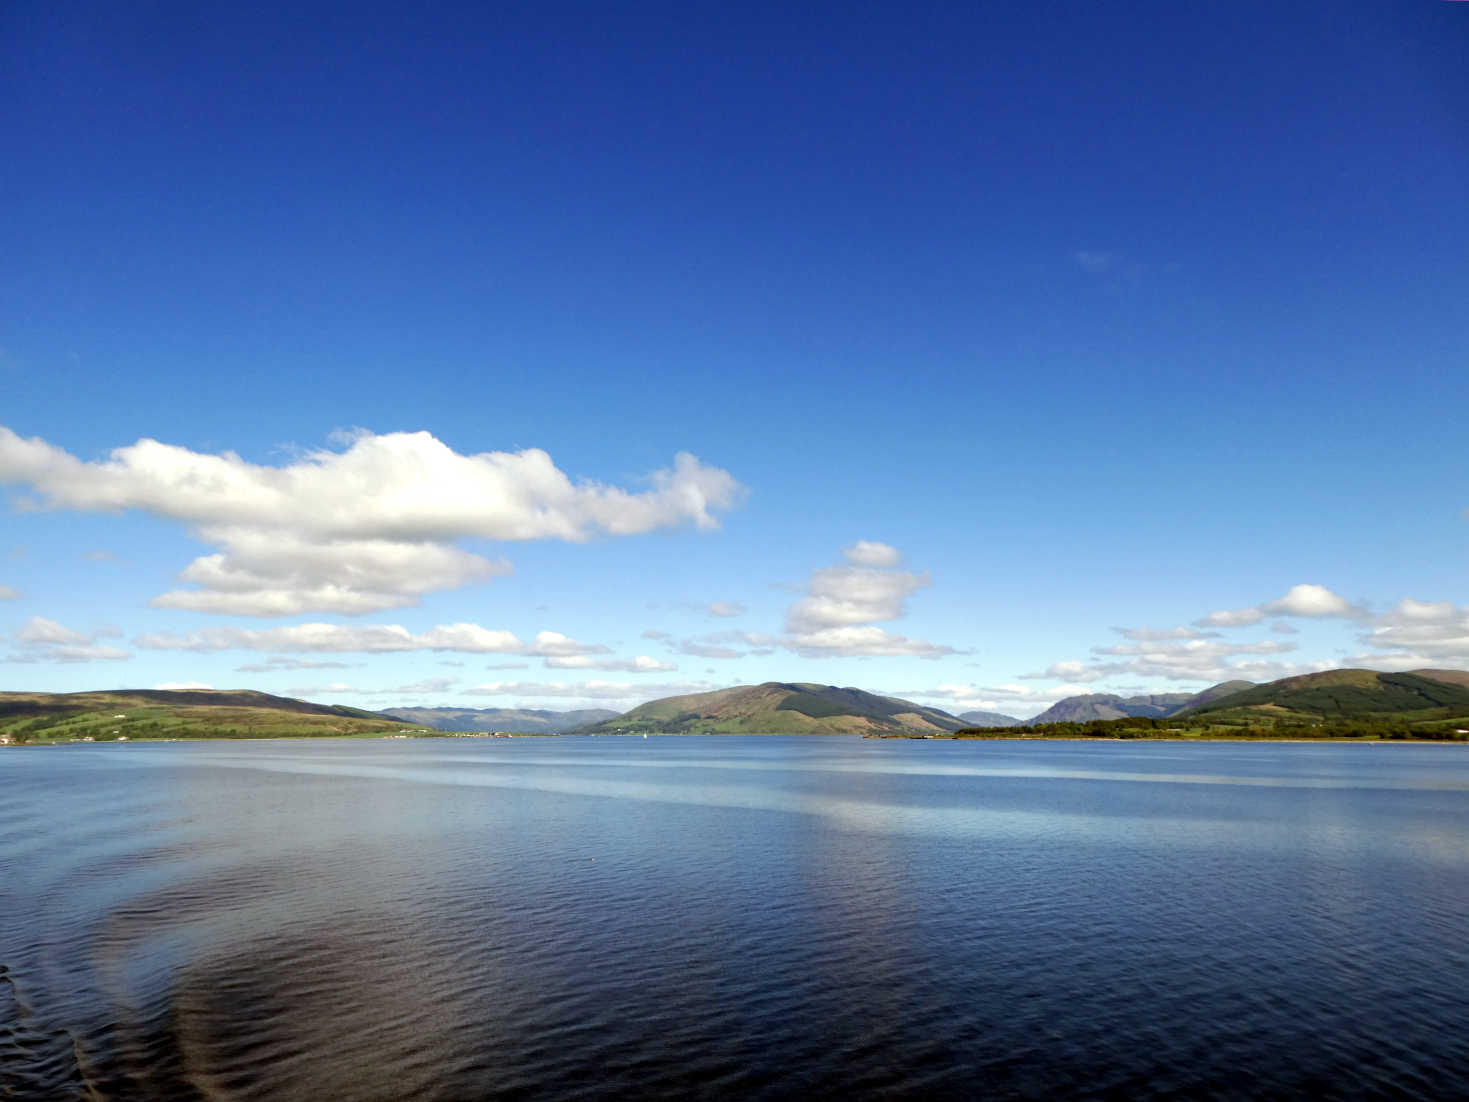 looking up the kyles of Bute